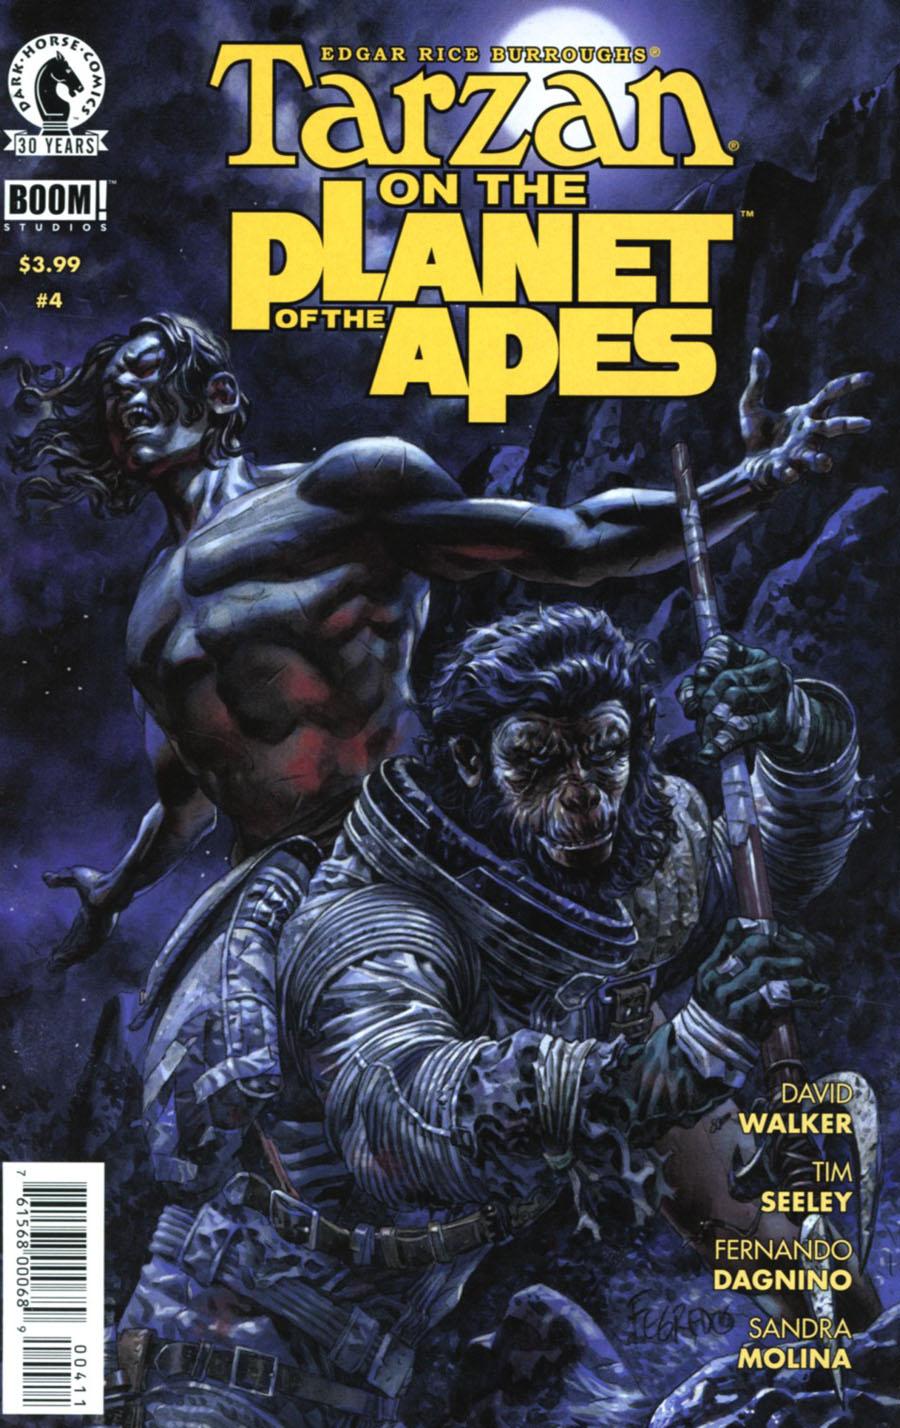 Tarzan On The Planet Of The Apes Vol. 1 #4